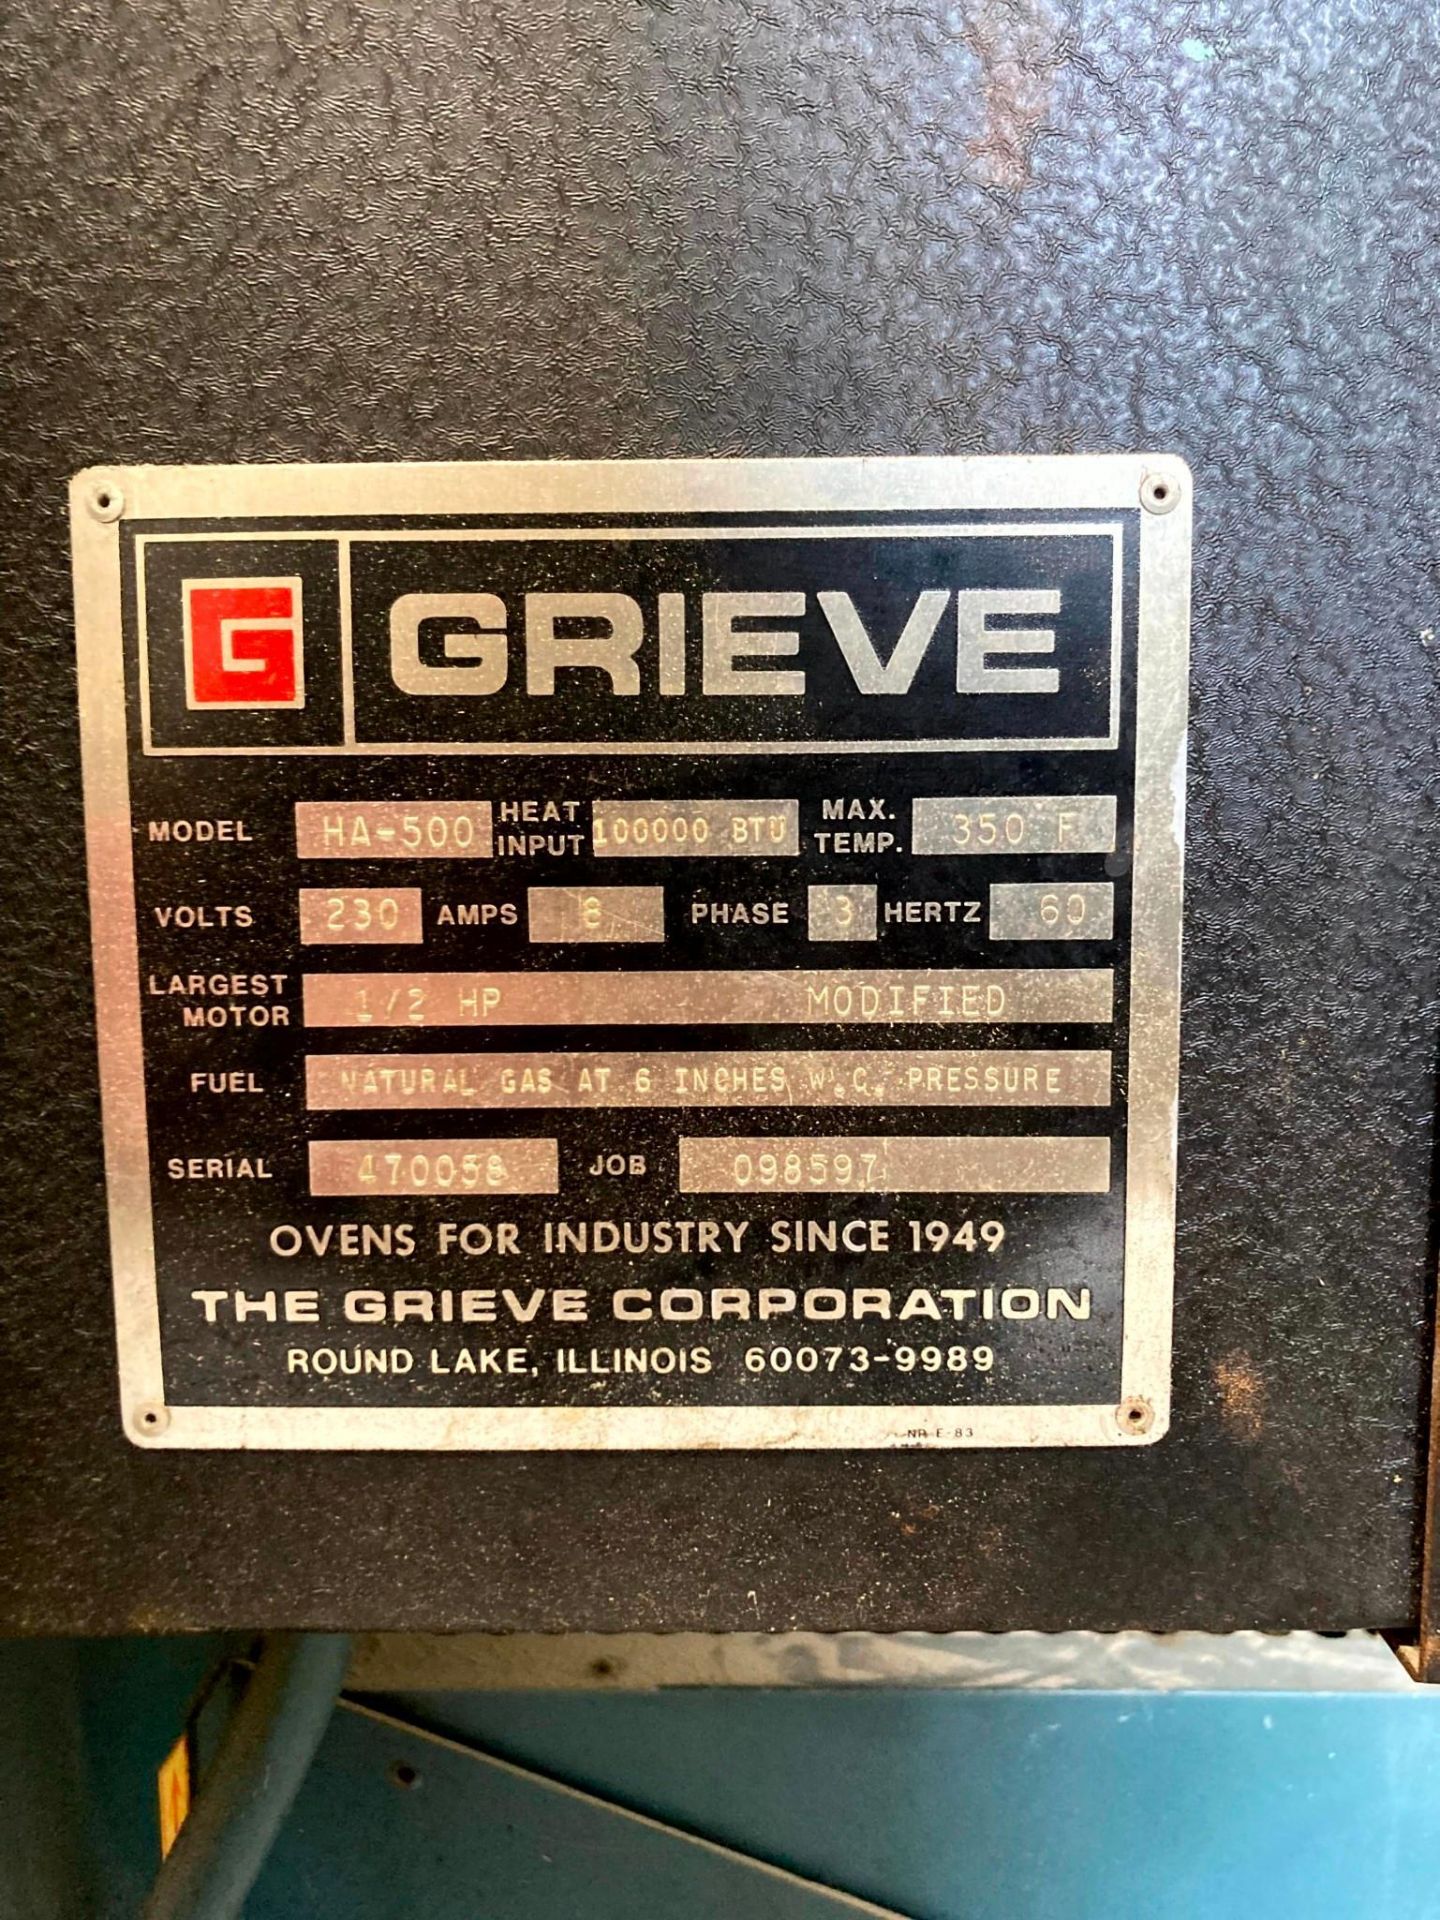 USED GRIEVE HA-500 OVEN - Image 9 of 10